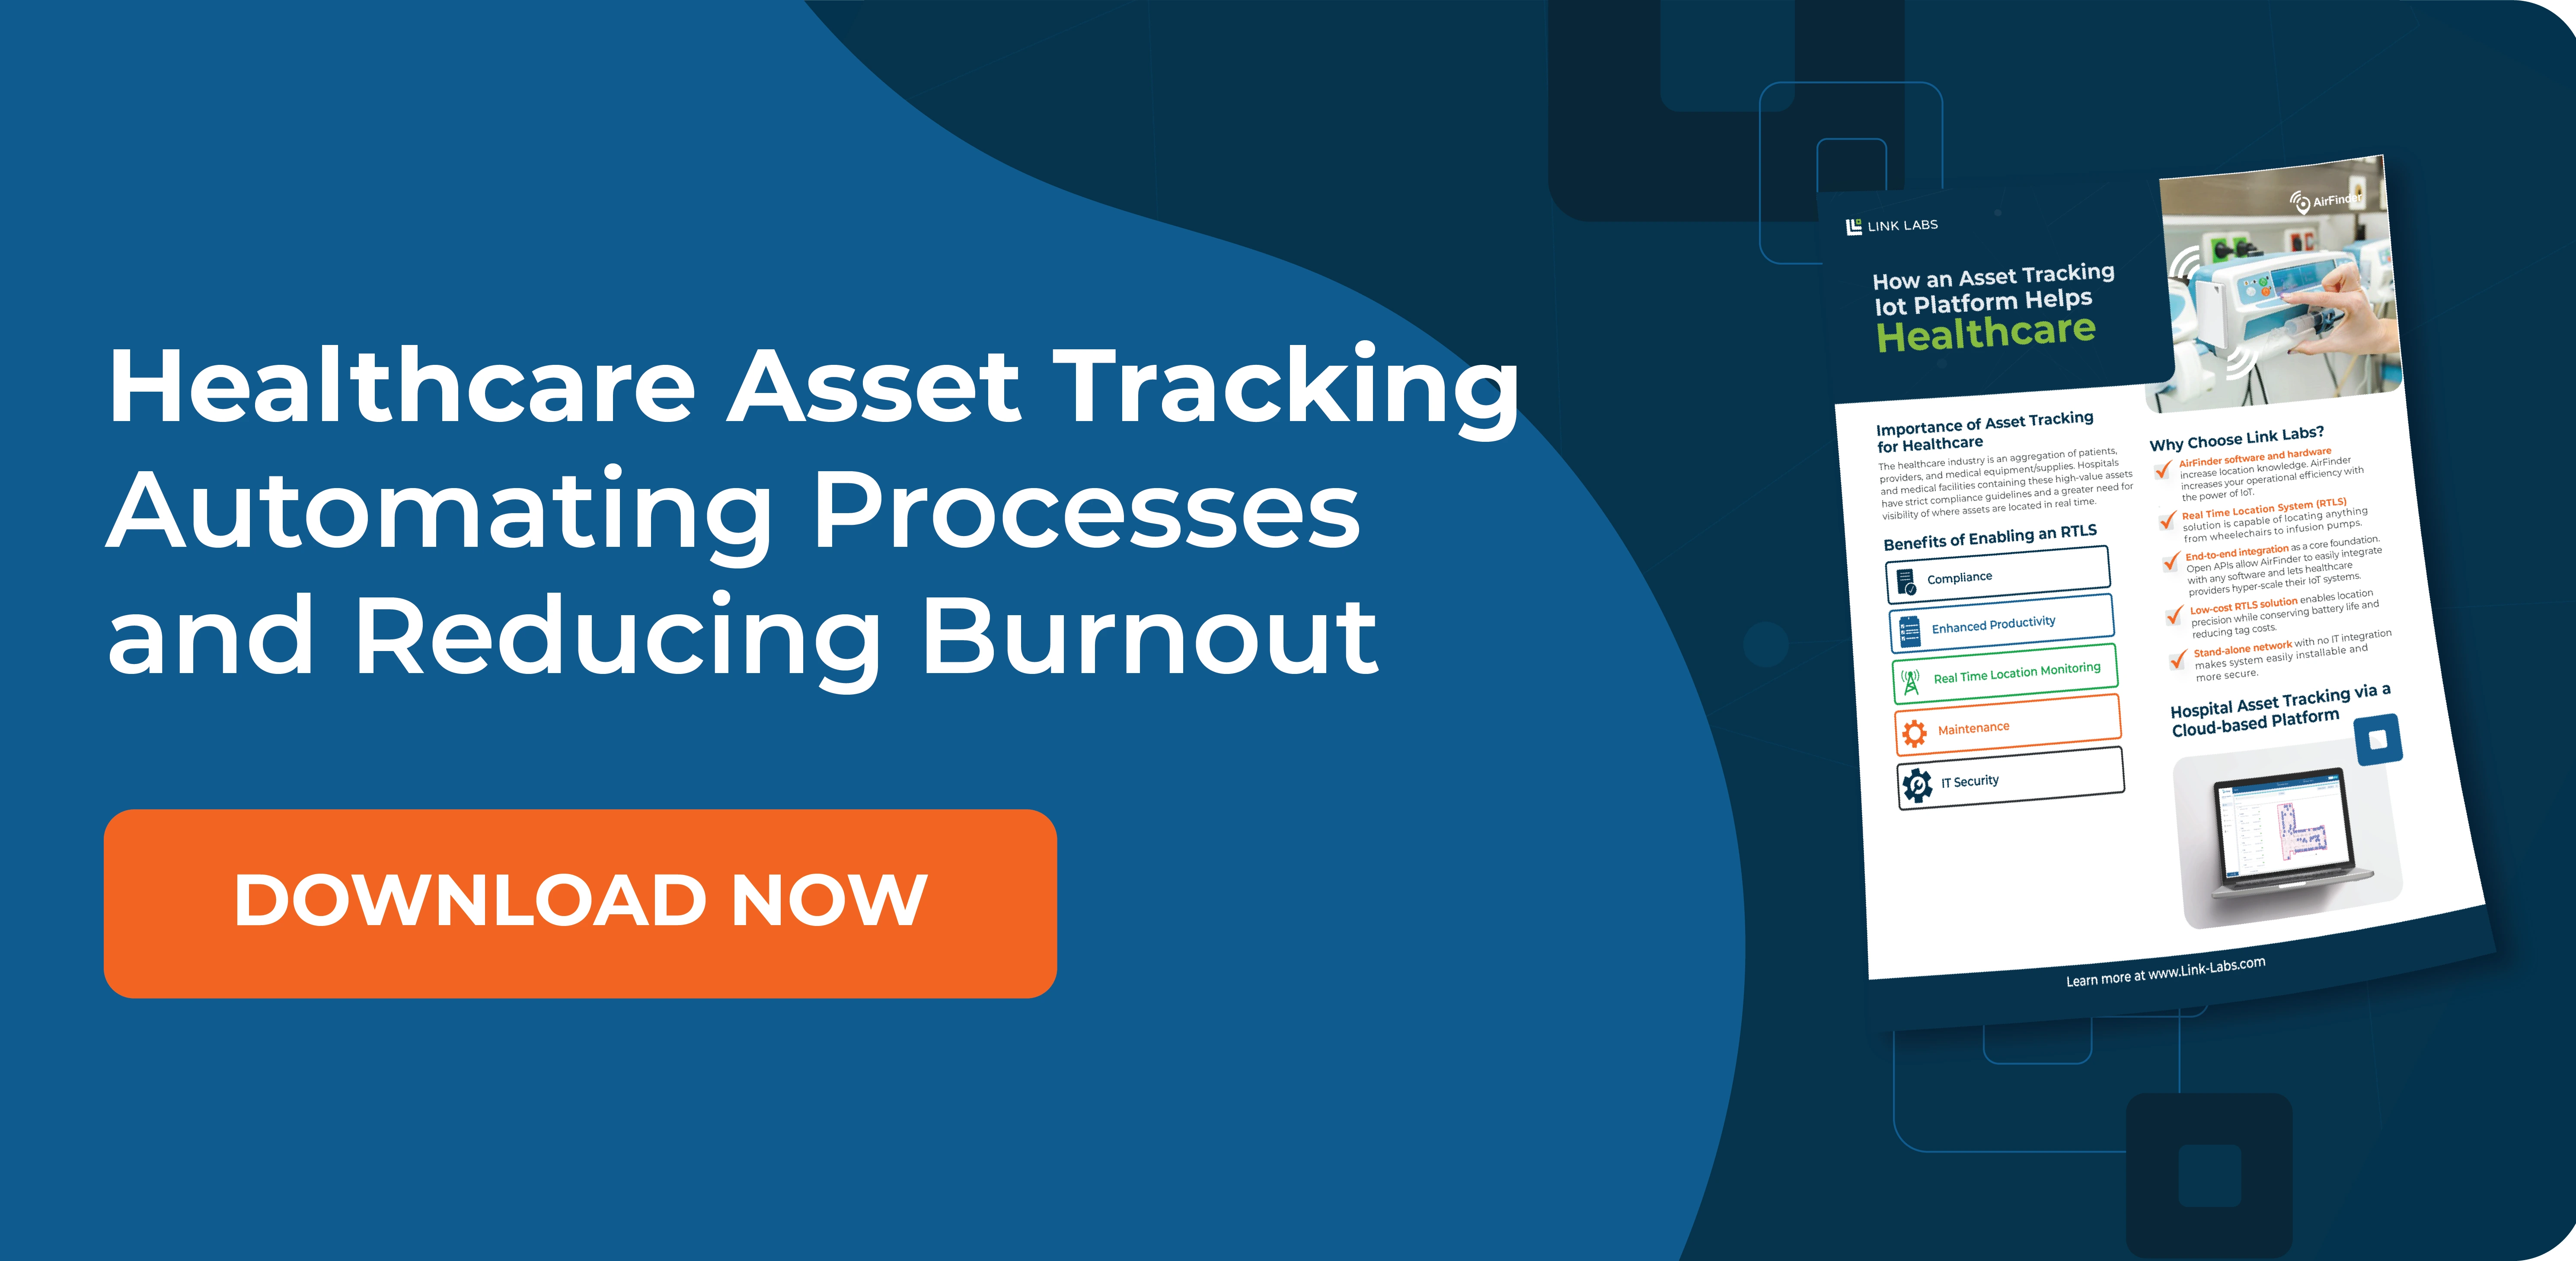 Nurse burnout is a major issue in hospitals across the US. Asset tracking can automate certain processes to give back time to nurses.